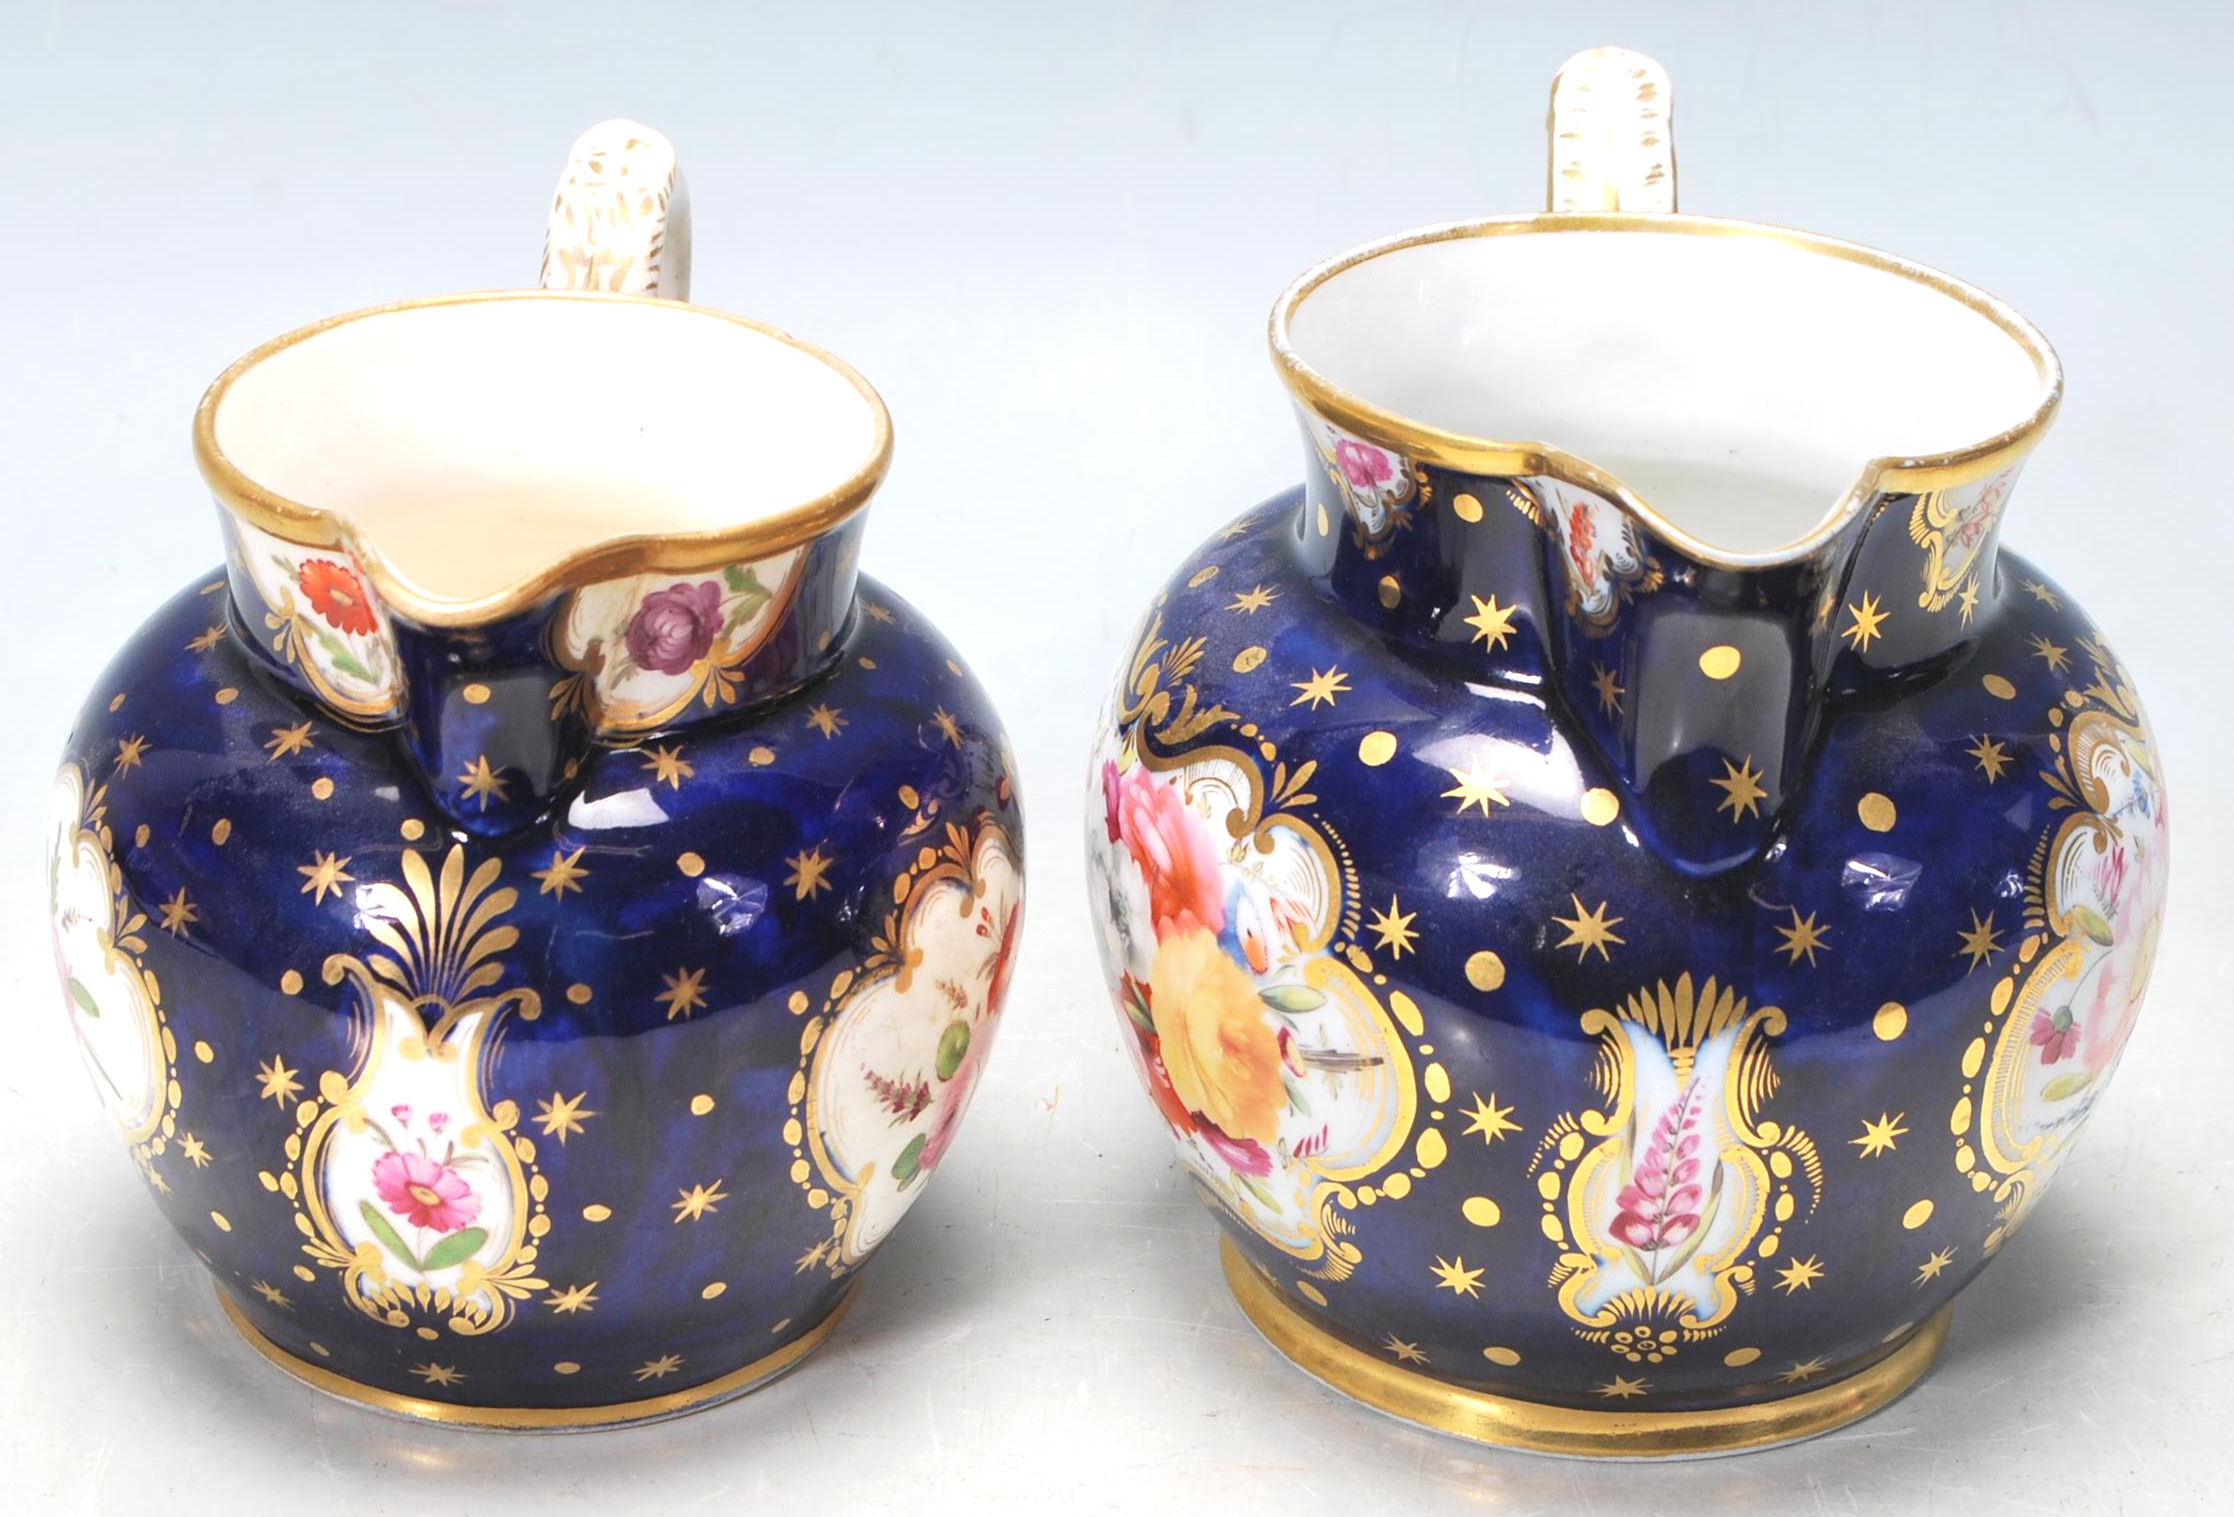 PAIR OF VICTORIAN 19TH CENTURY COBALT BLUE AND GILT JUGS - Image 3 of 8